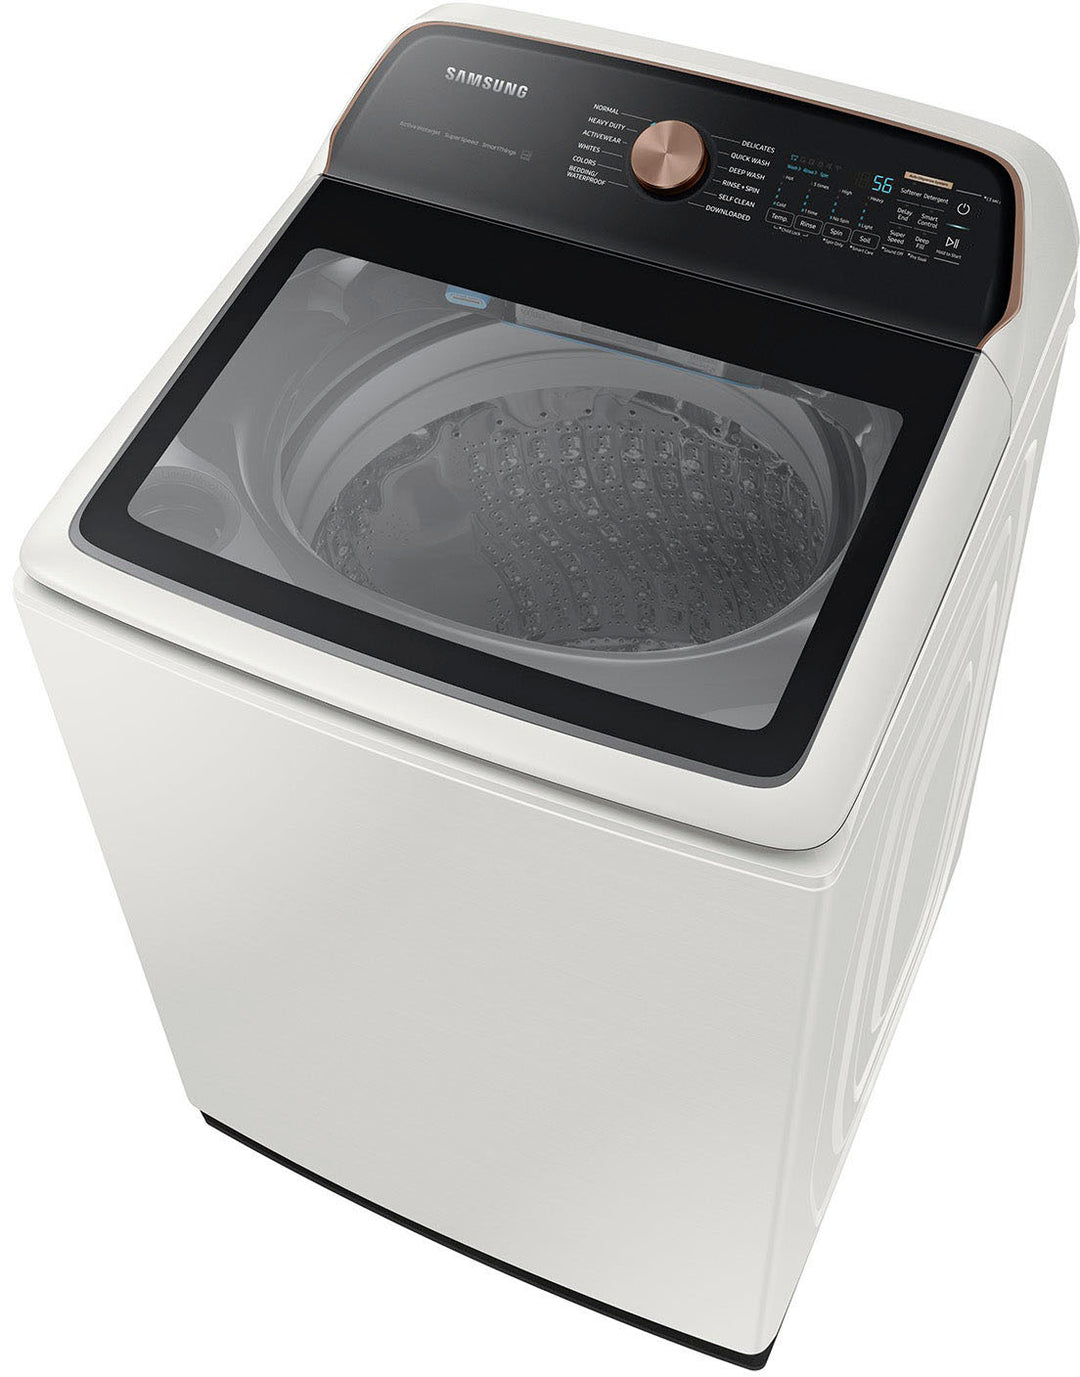 Samsung - 5.5 Cu. Ft. High-Efficiency Smart Top Load Washer with Auto Dispense System - Ivory_4